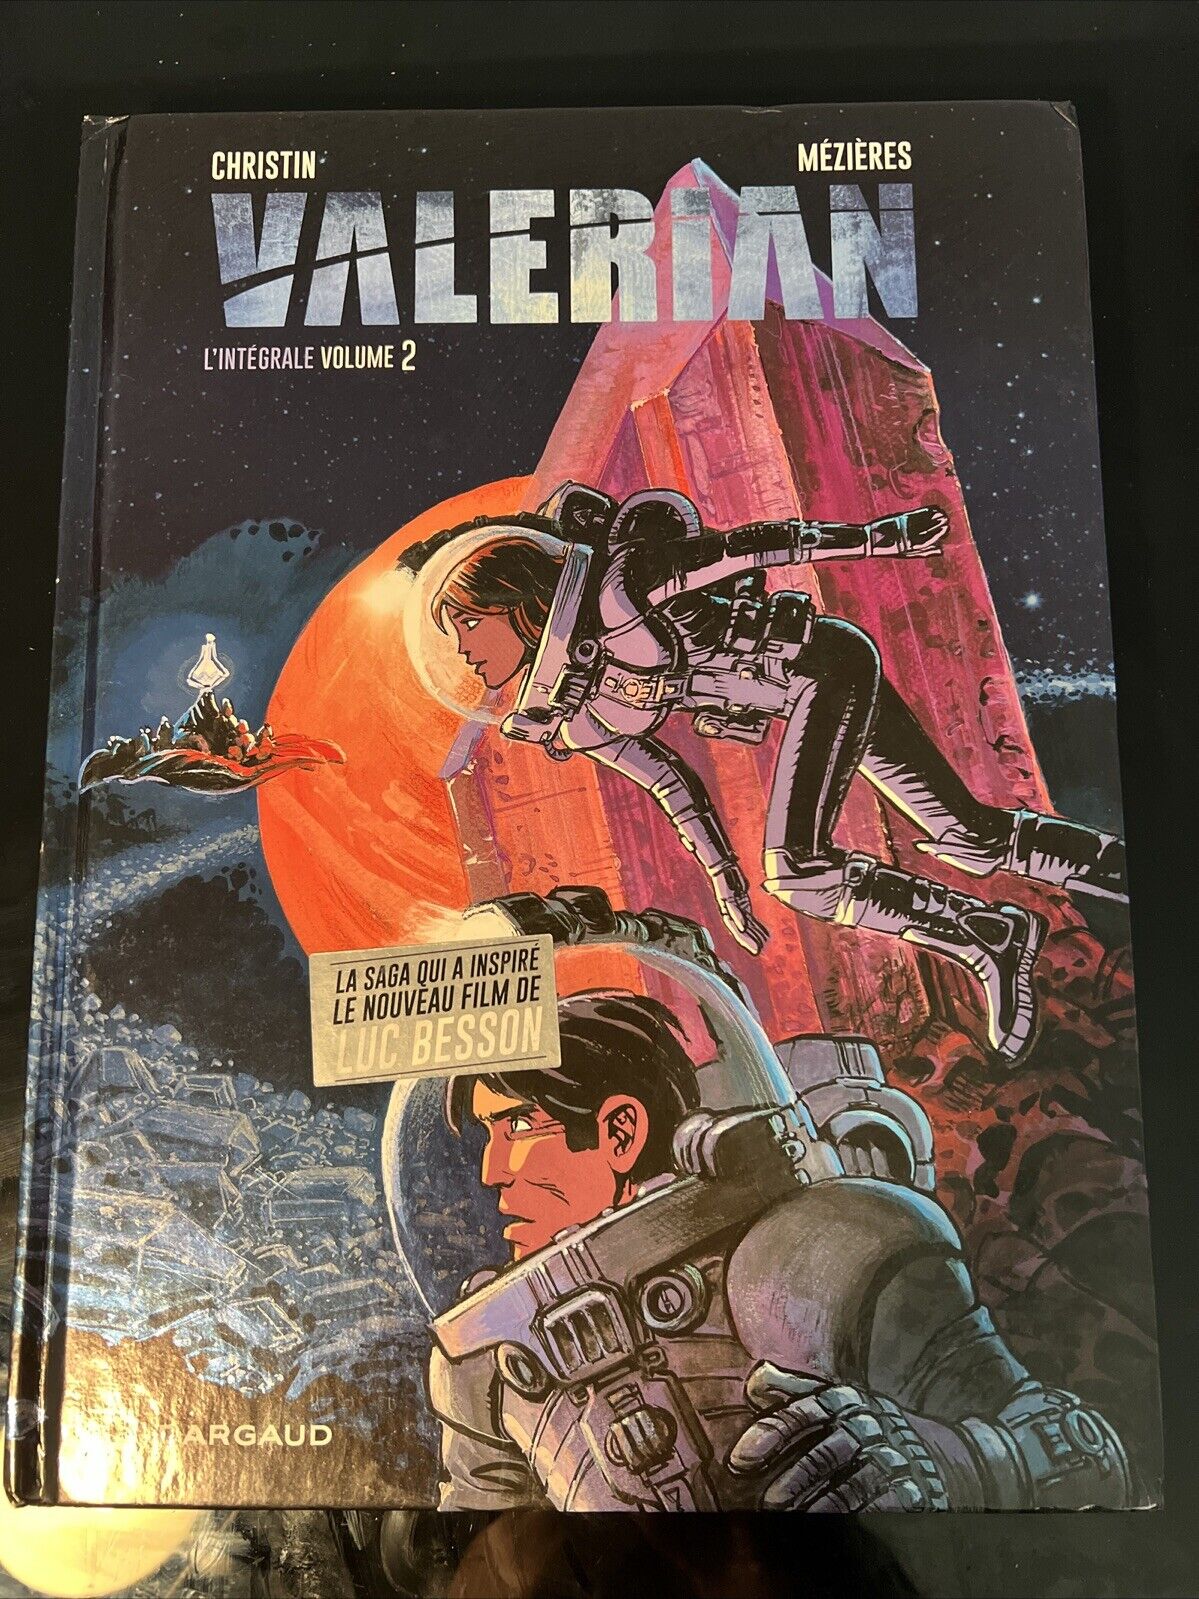 valerian: the complete collection volume 2